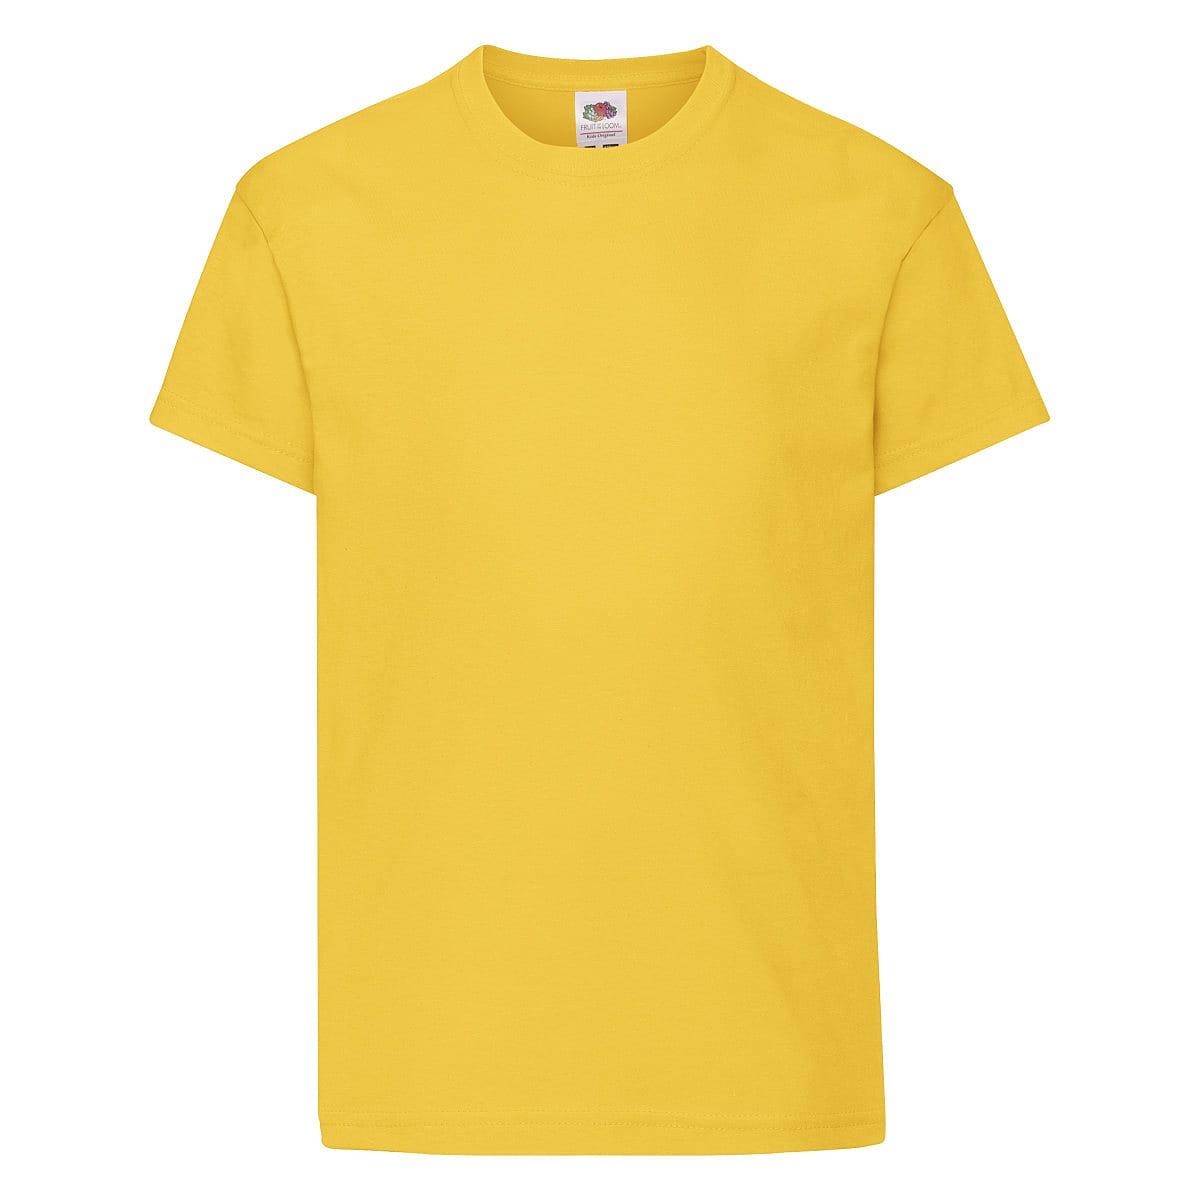 Fruit Of The Loom Kids Original T-Shirt in Sunflower (Product Code: 61019)